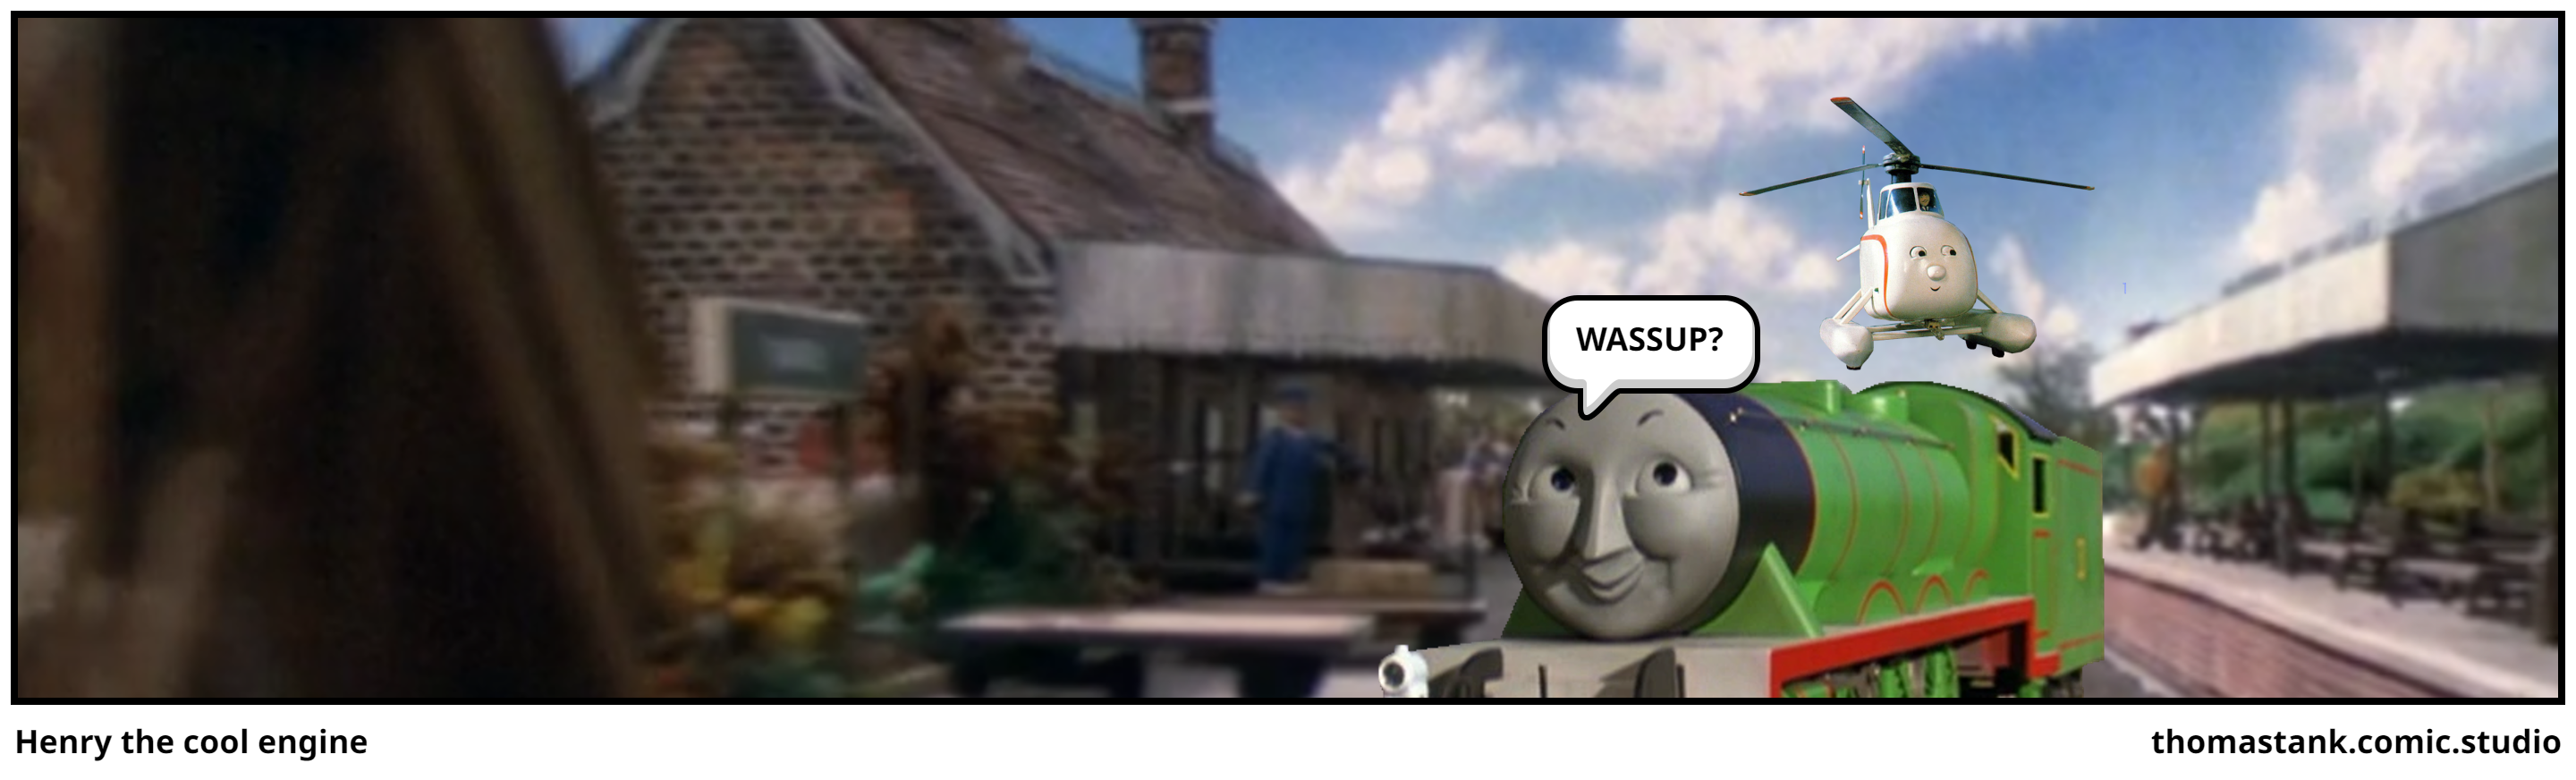 Henry the cool engine